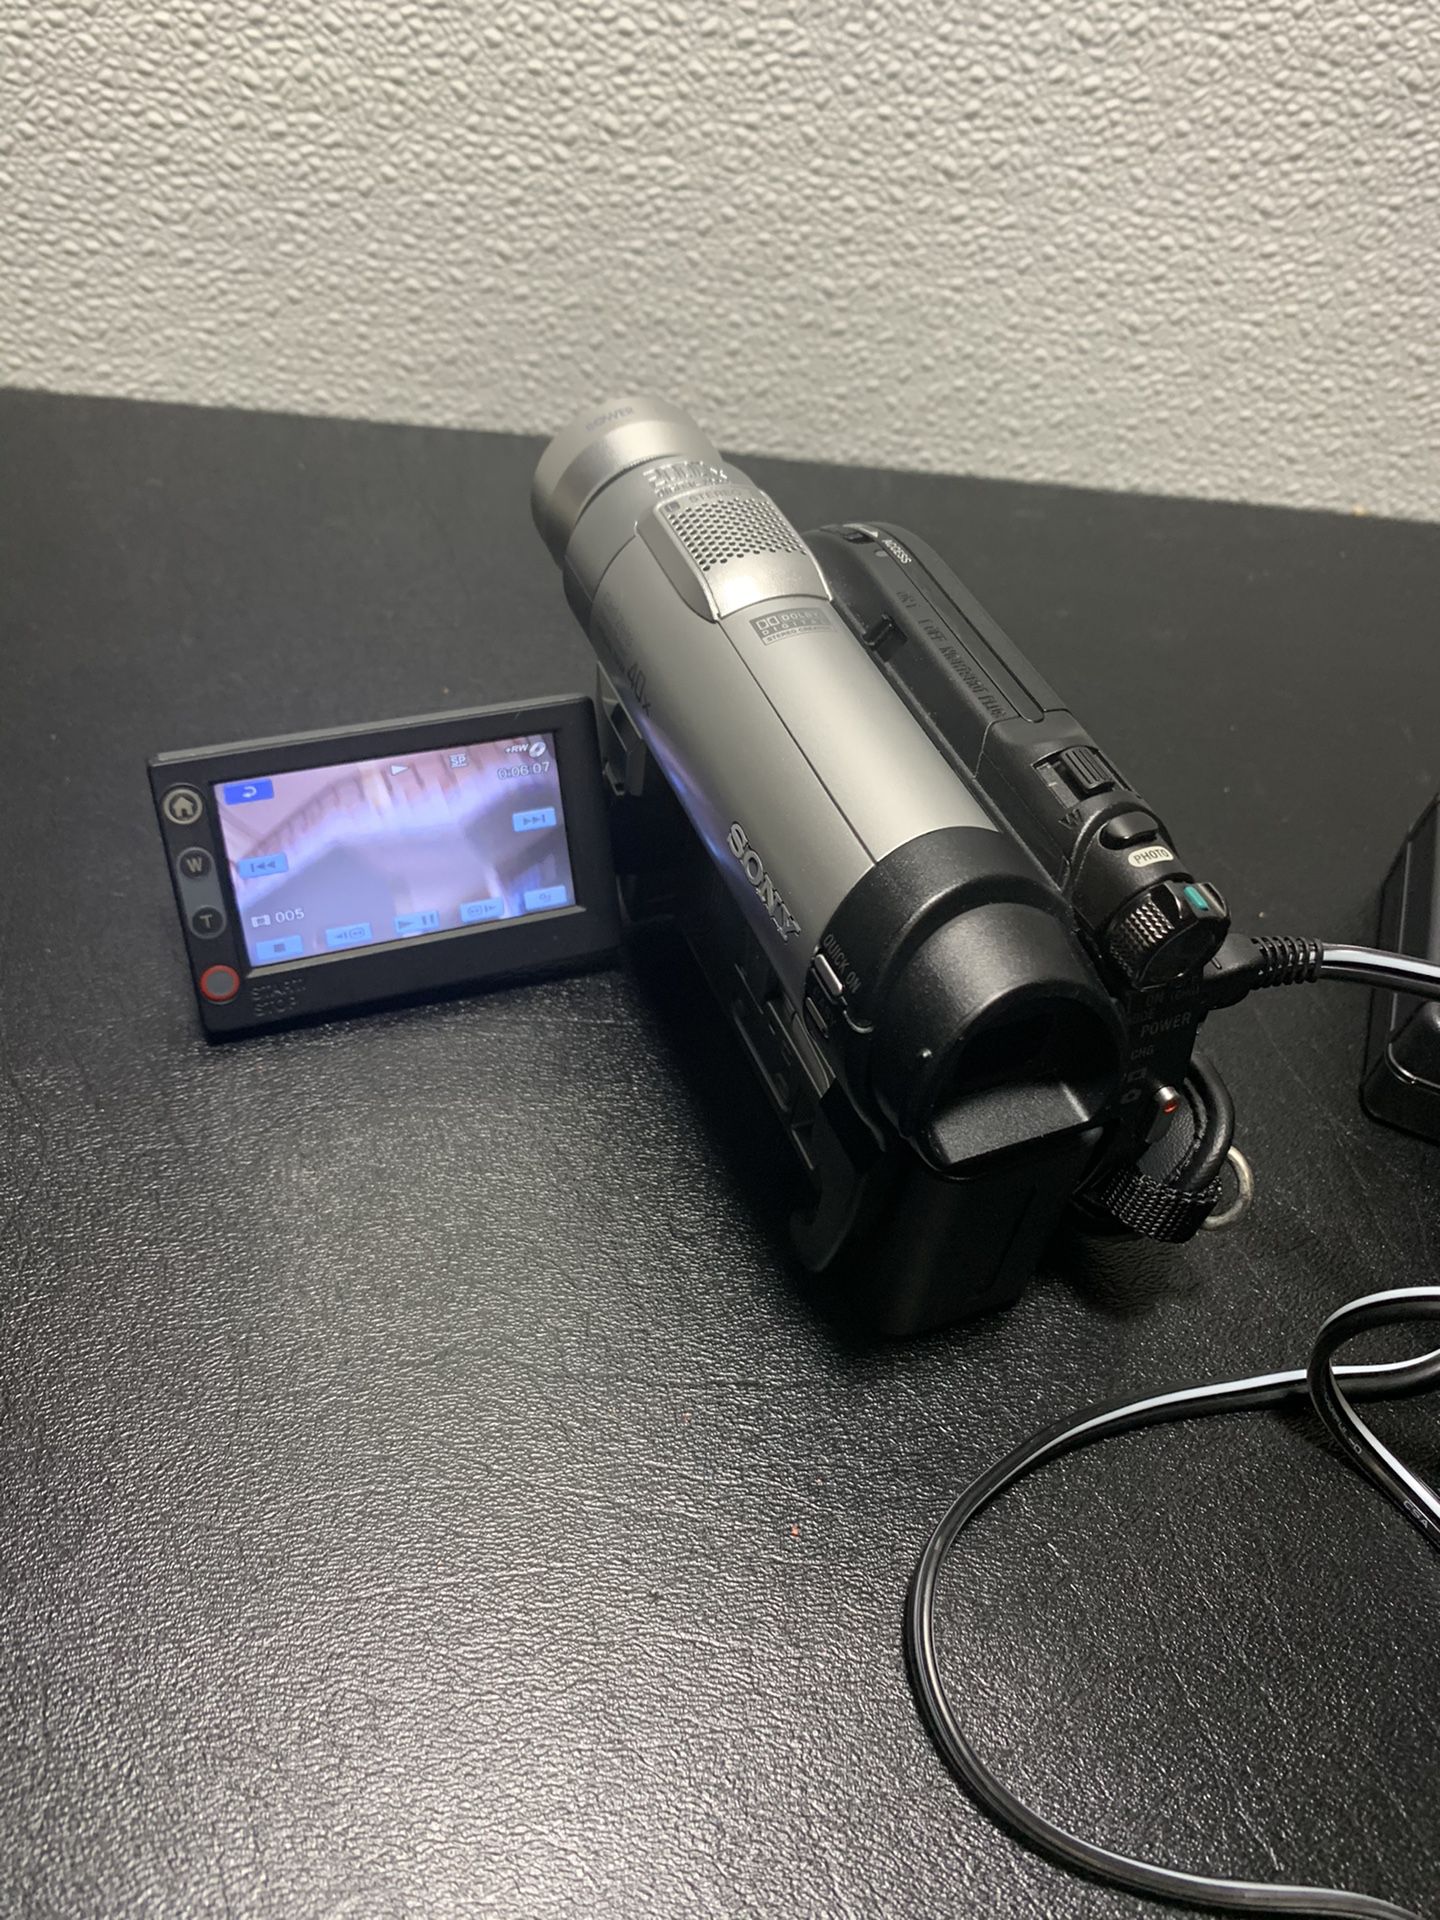 Sony DCR-DVD610 DVD Handycam Camcorder Carl Zeiss 40x Optical Zoom Touch Screen